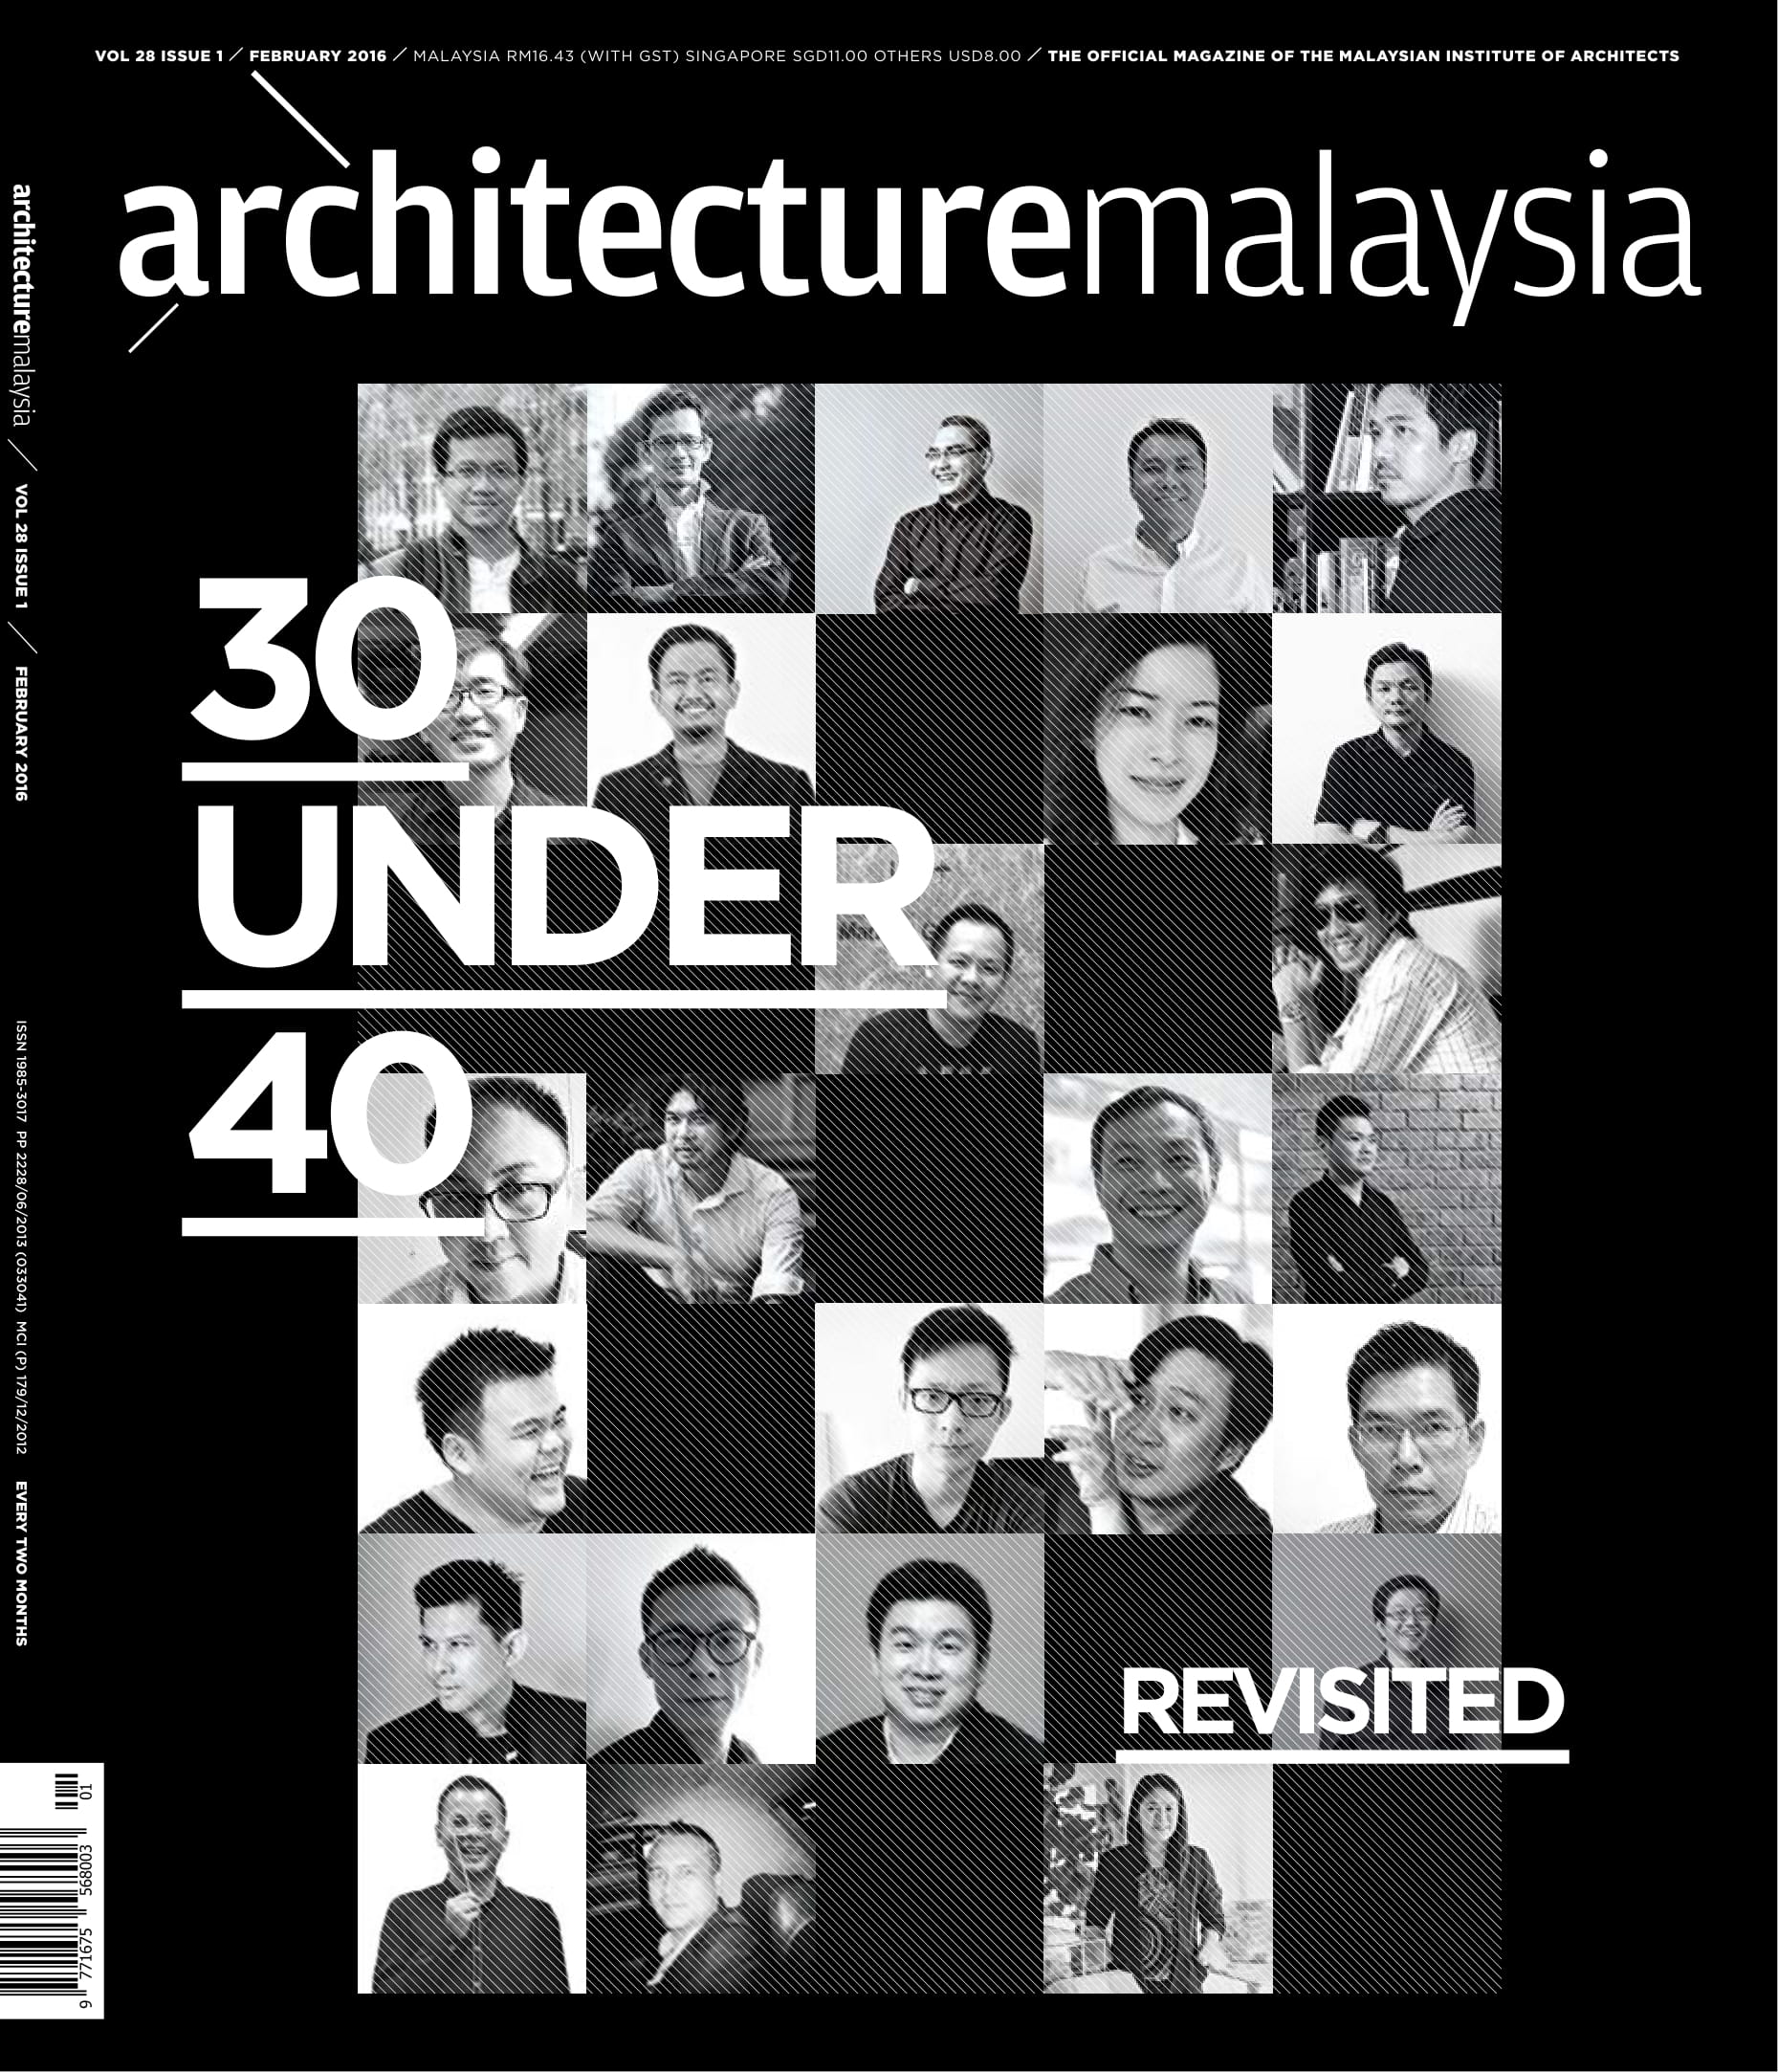 AM Issue 28.1